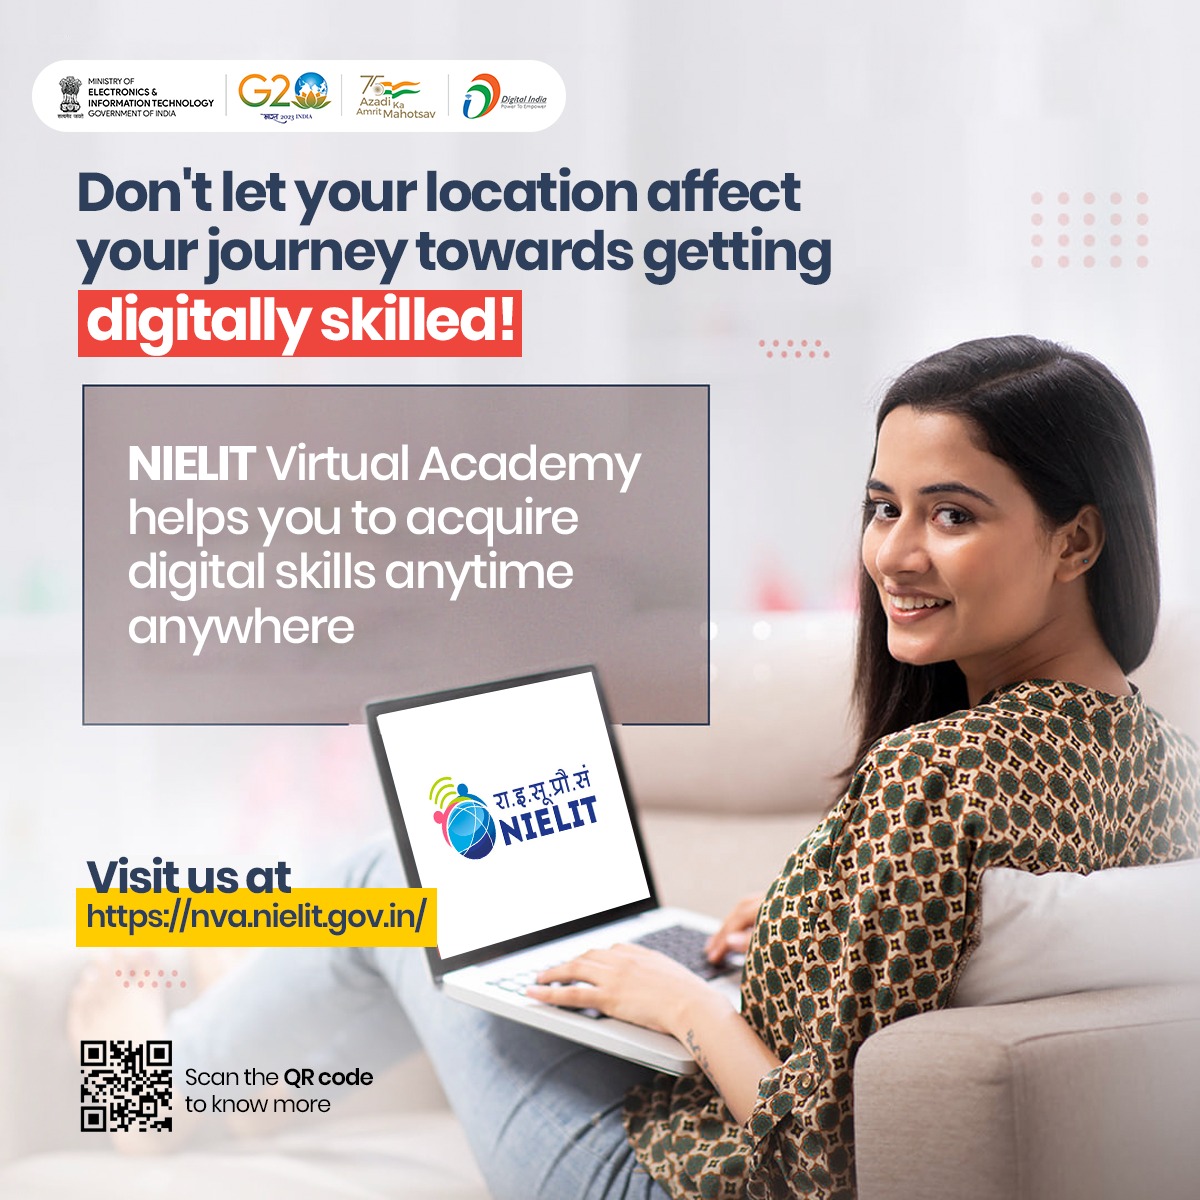 Virtual Academy provides affordable #digitalskill training in areas like information security, cloud computing